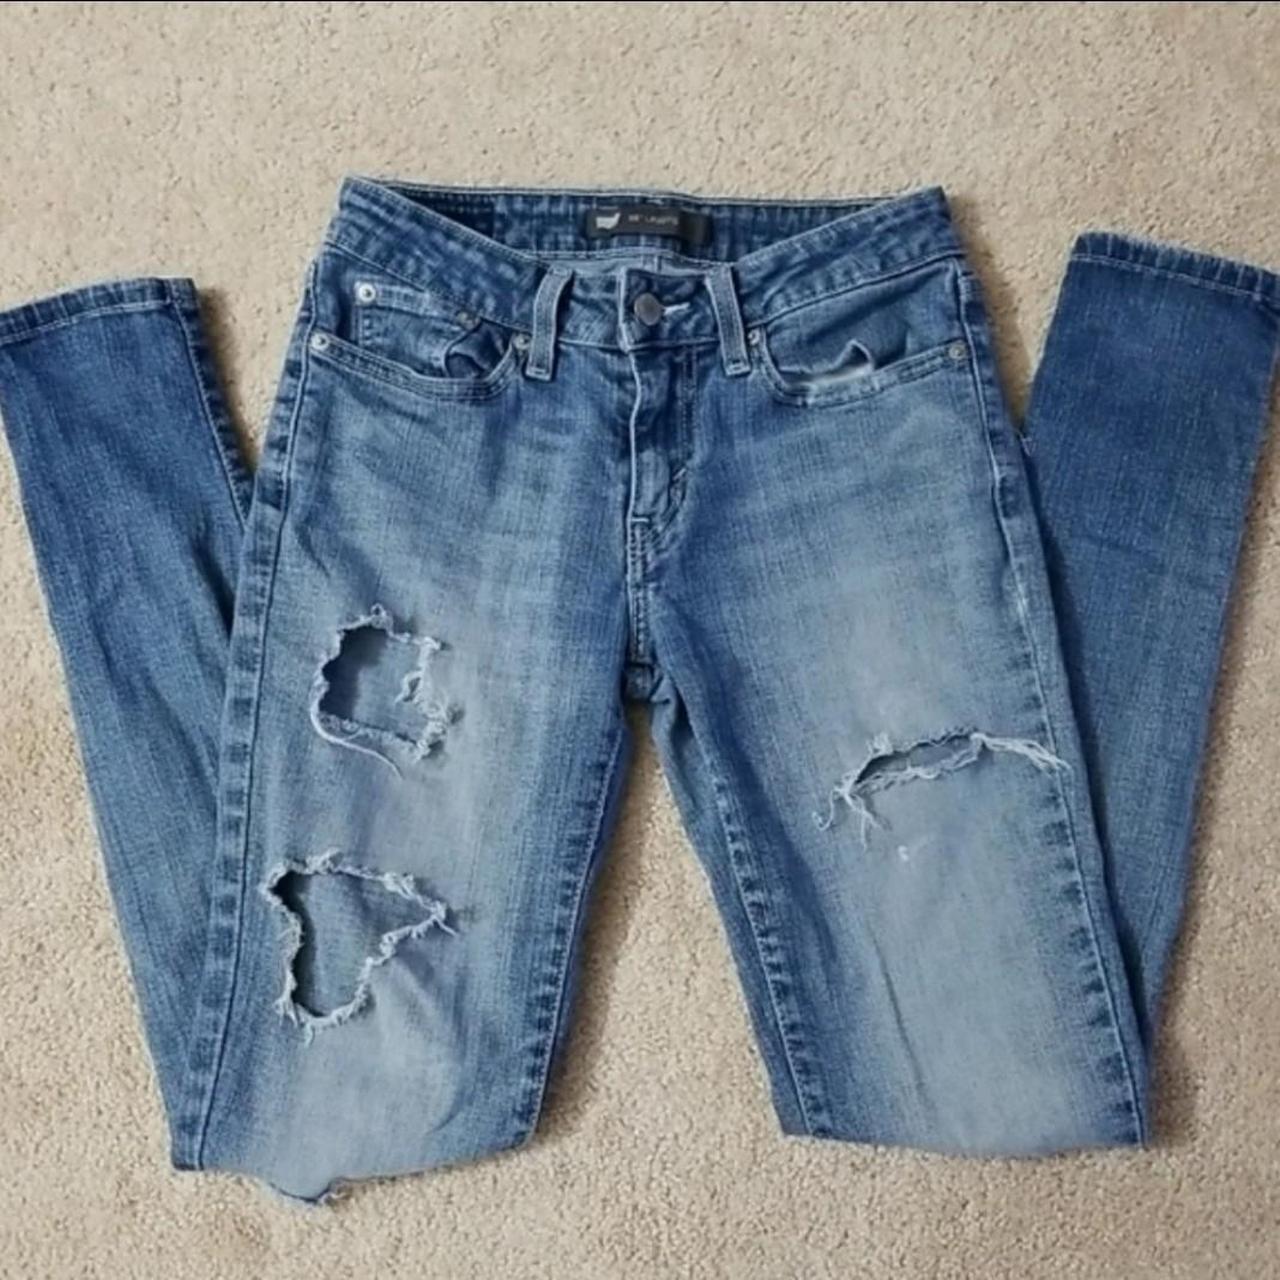 Levi's 535 | Skinny Jeans Ripped Detail Excellent... - Depop